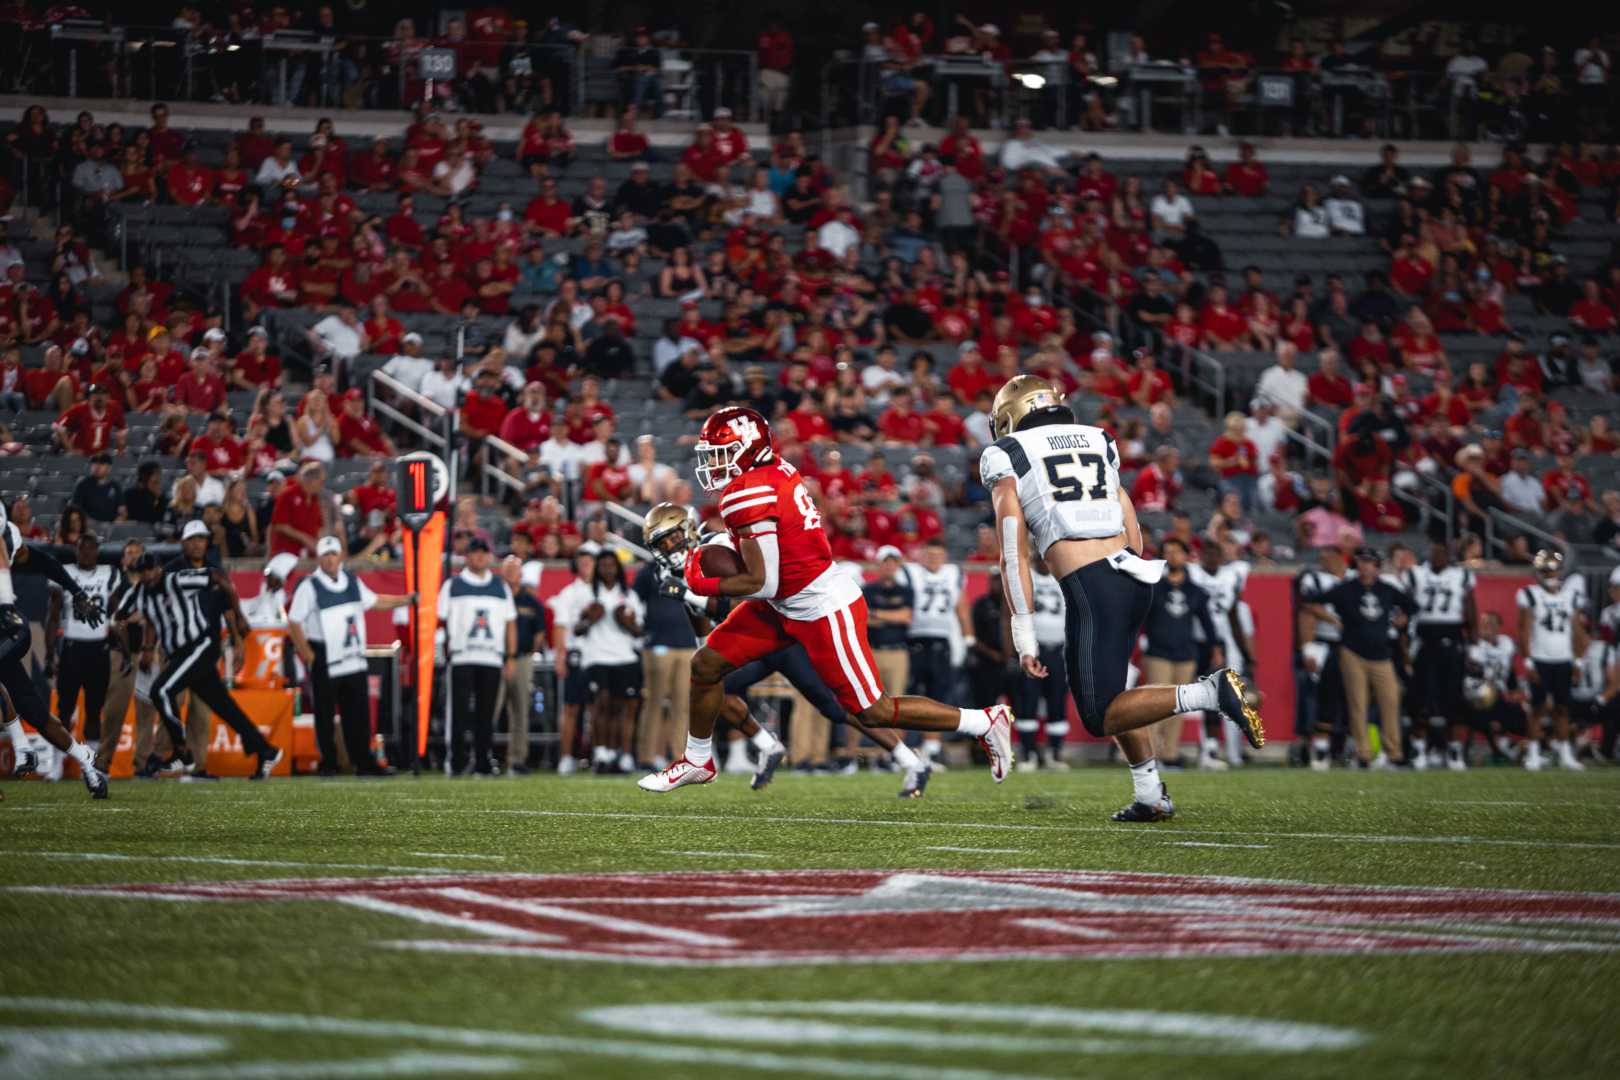 Christian Trahan led the way for the UH tight ends in 2021, hauling in 37 receptions for 398 yards and two touchdowns. | James Schillinger/The Cougar